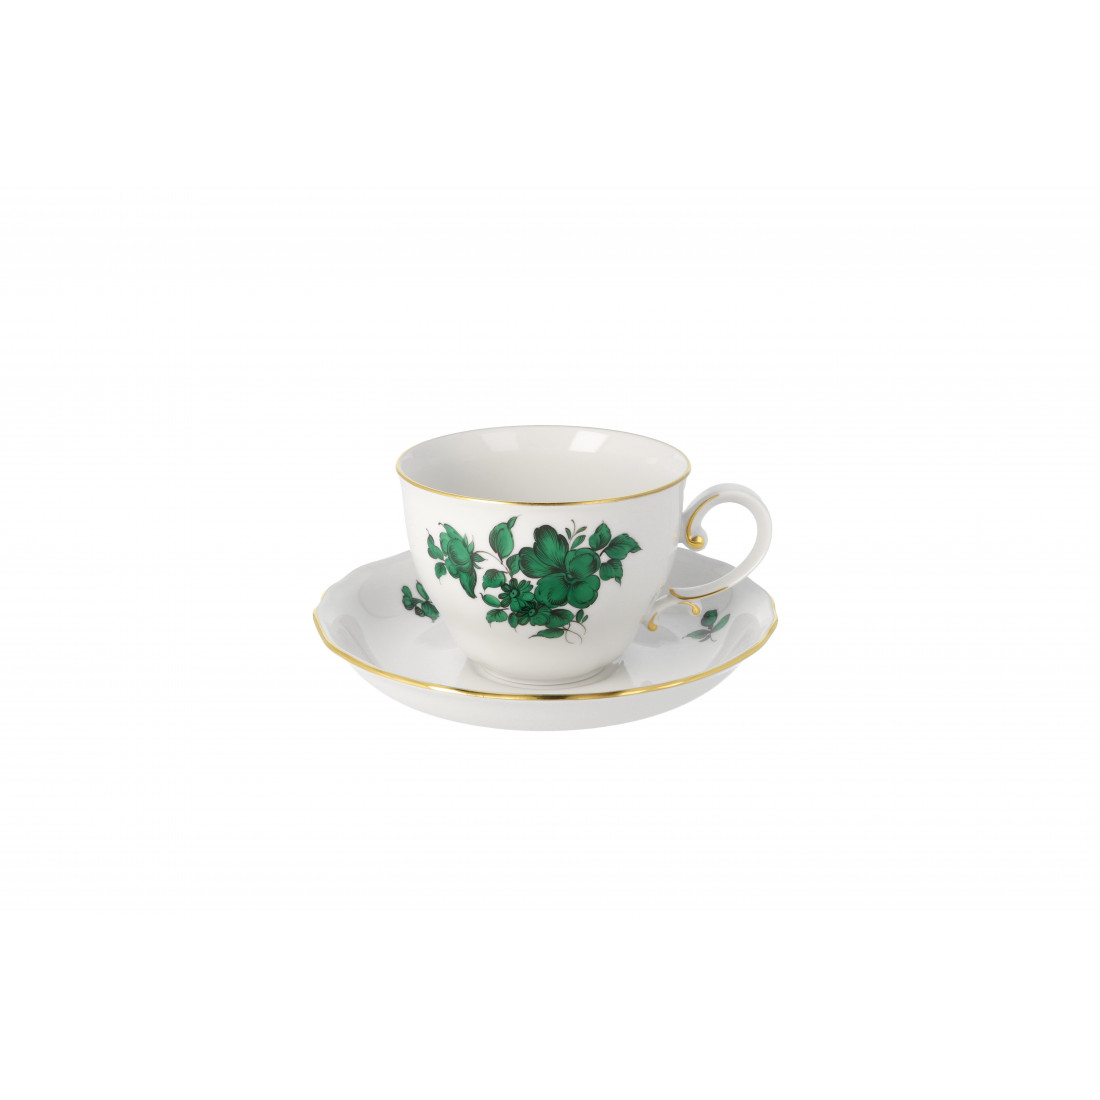 COFFEE CUP MOZART, 0.2L, DECOR MARIA THERESIA